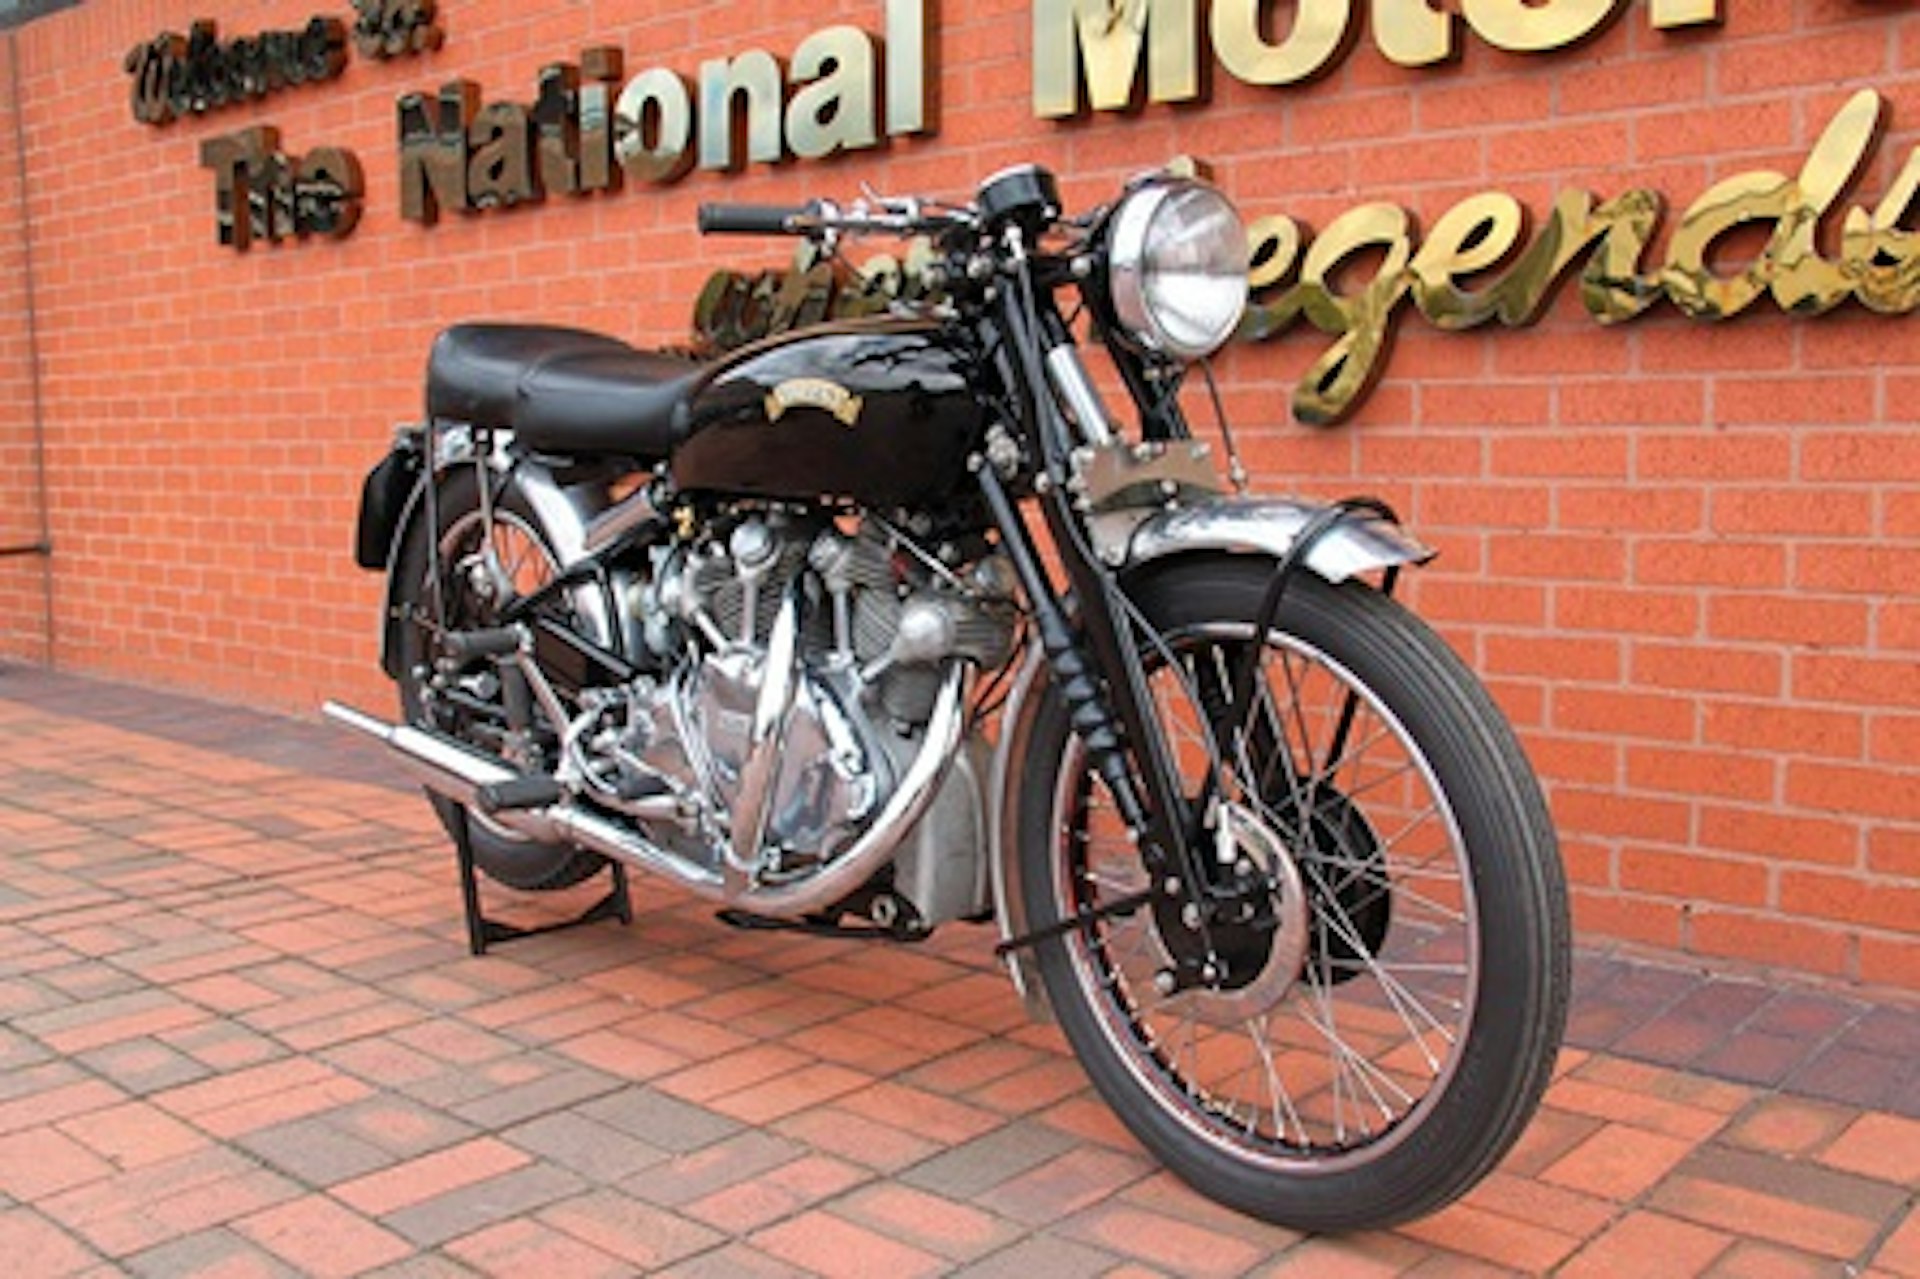 Visit to The National Motorcycle Museum for Two Adults and Two Children 2